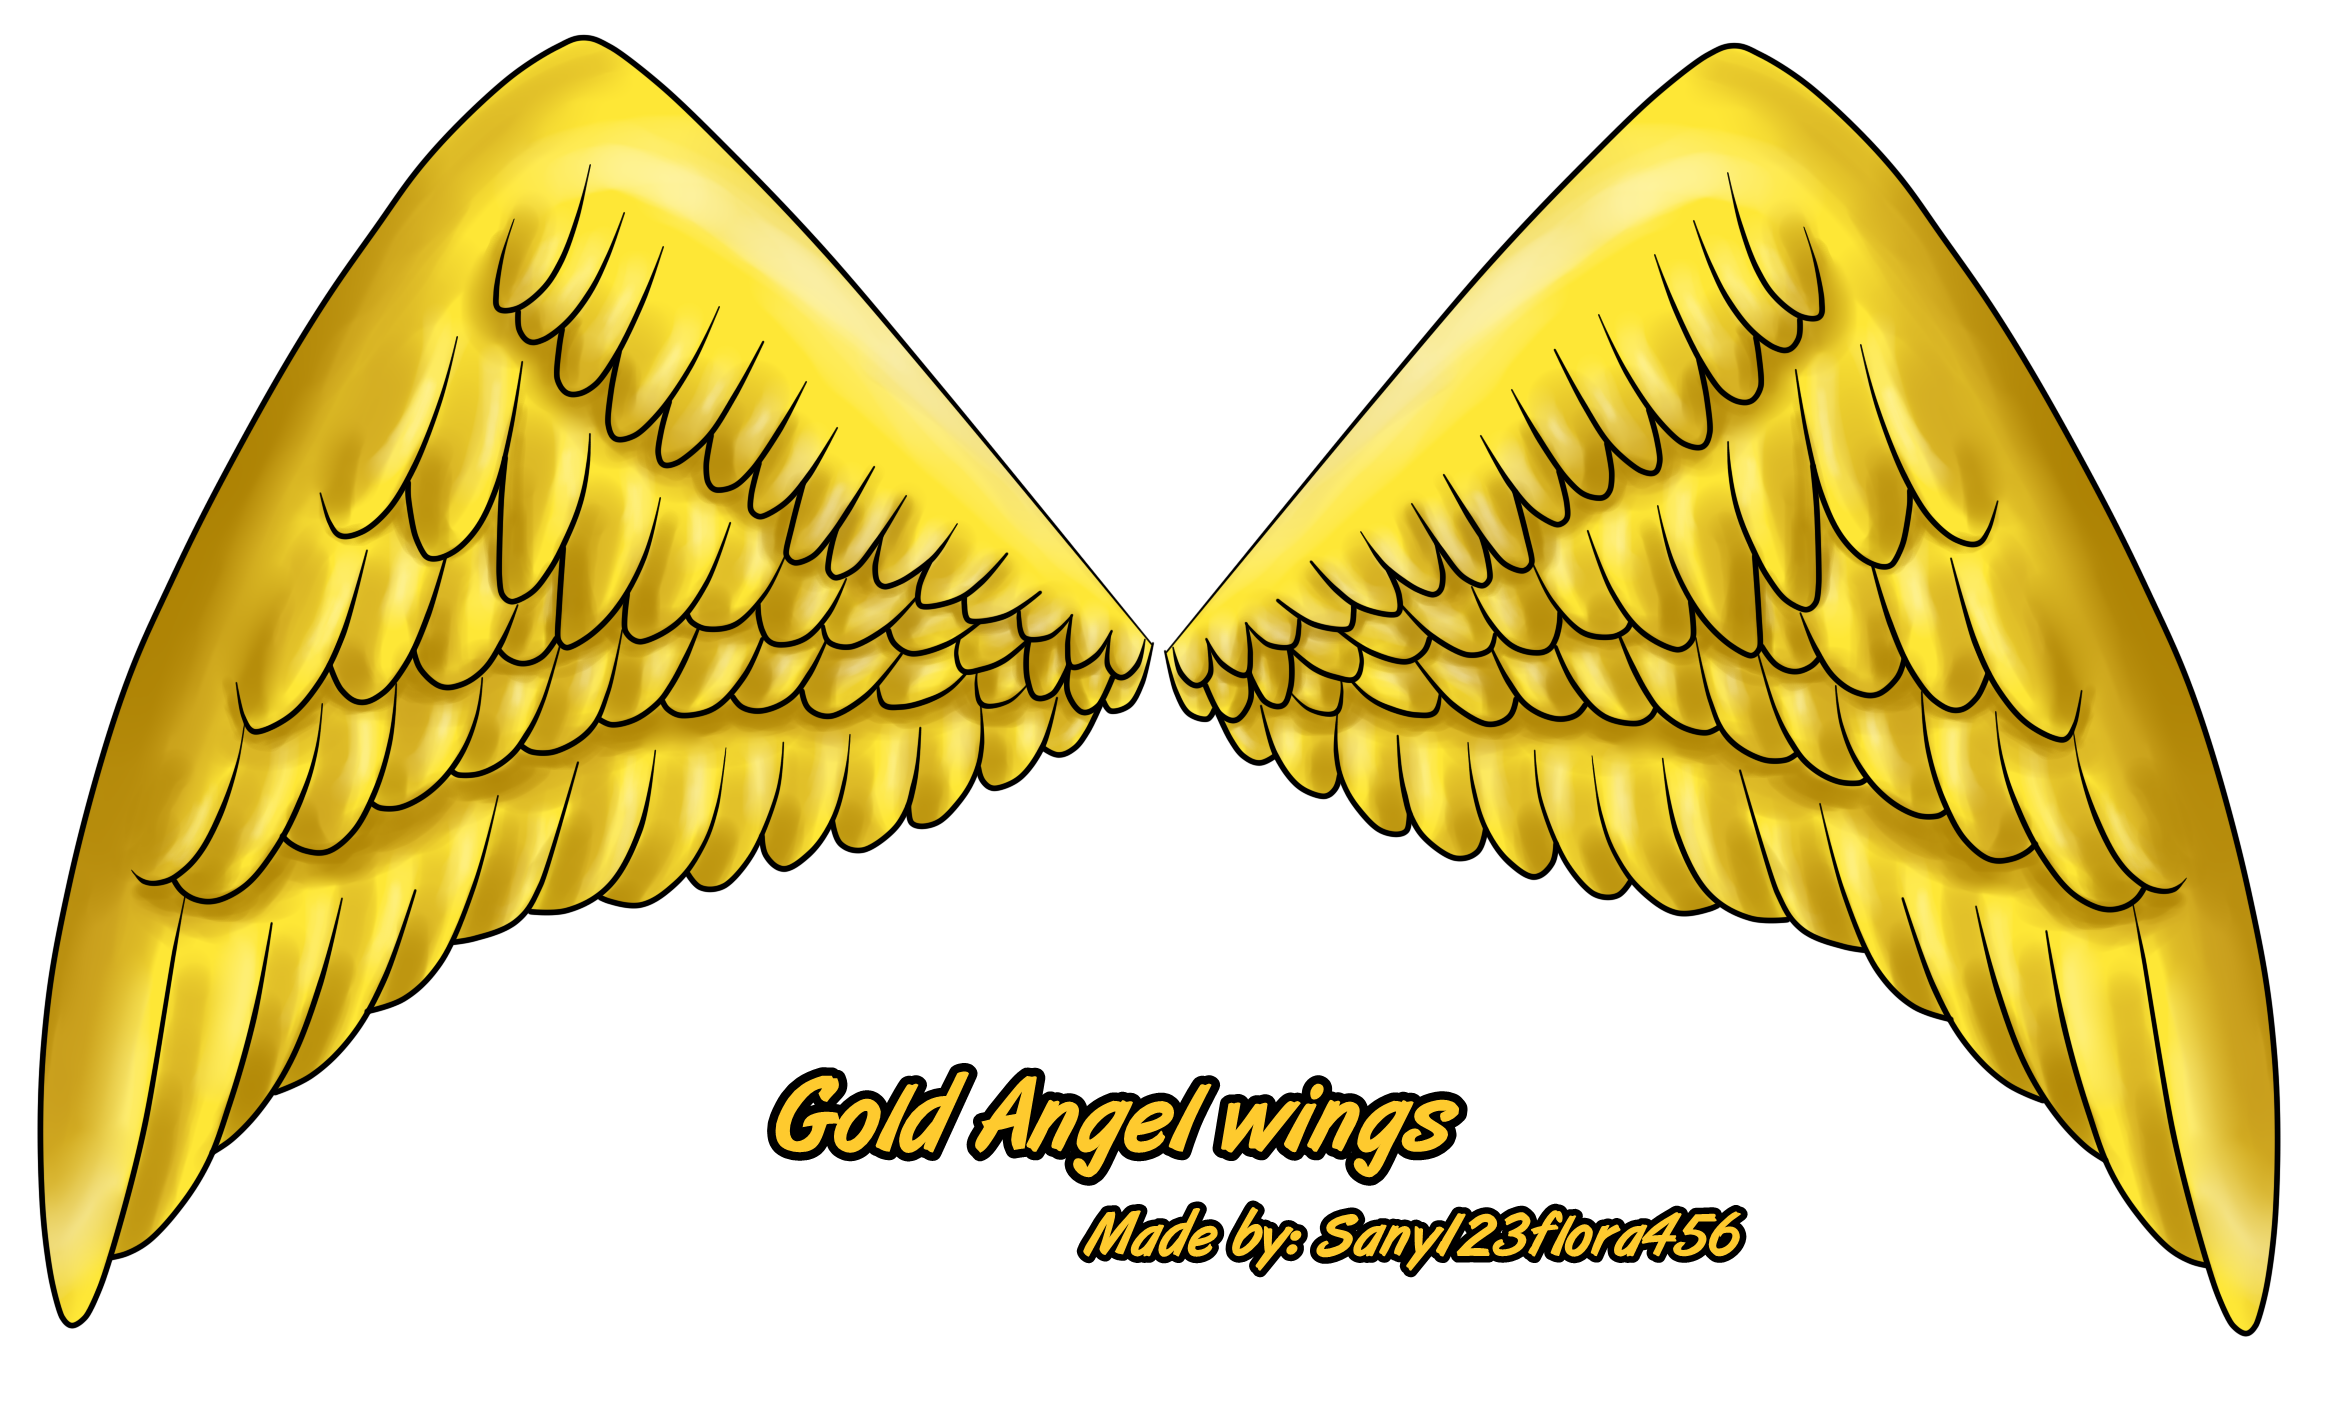 Wing clipart yellow. Gold angel wings by